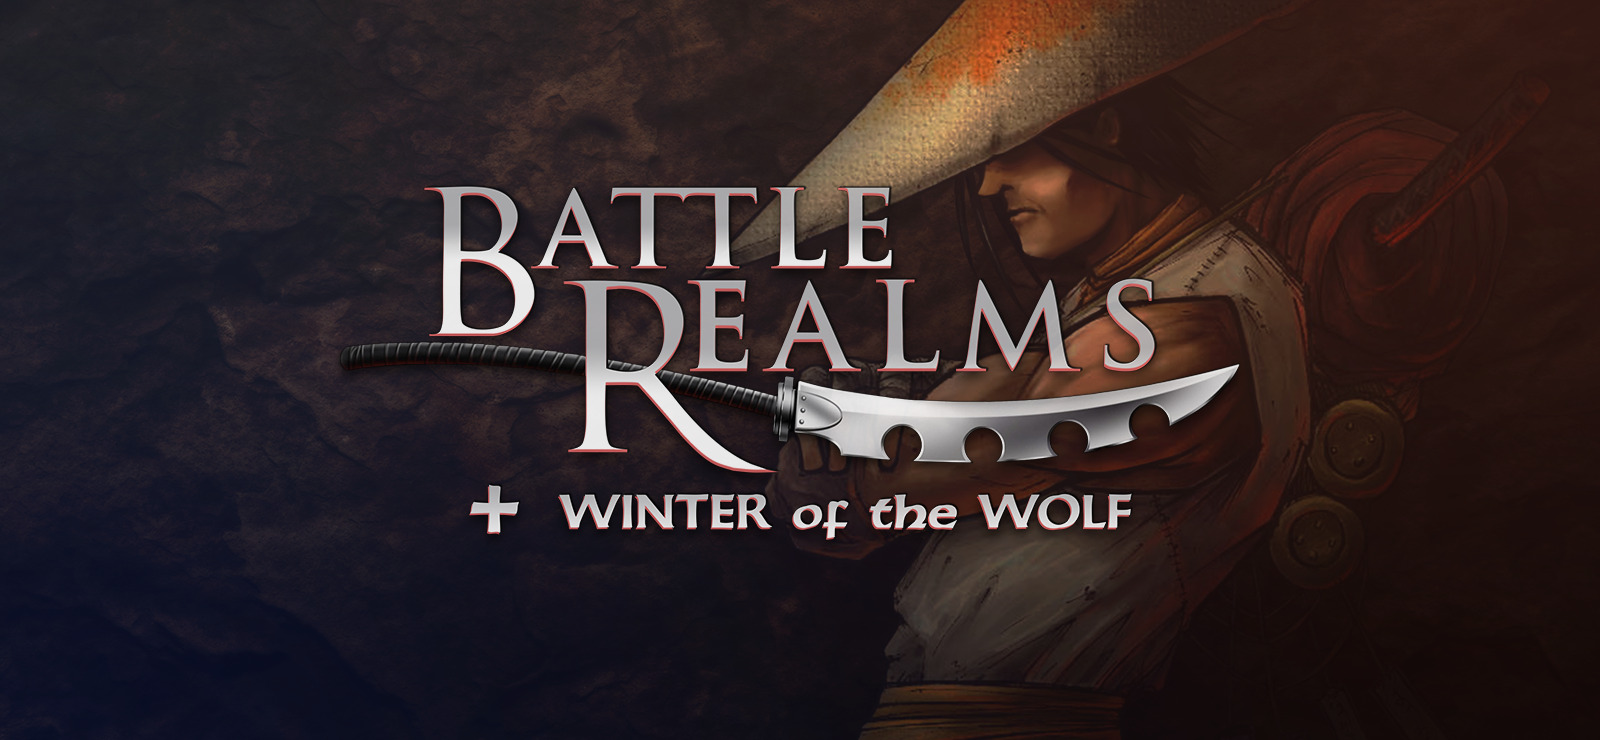 Battle Realms + Winter of the Wolf on GOG.com